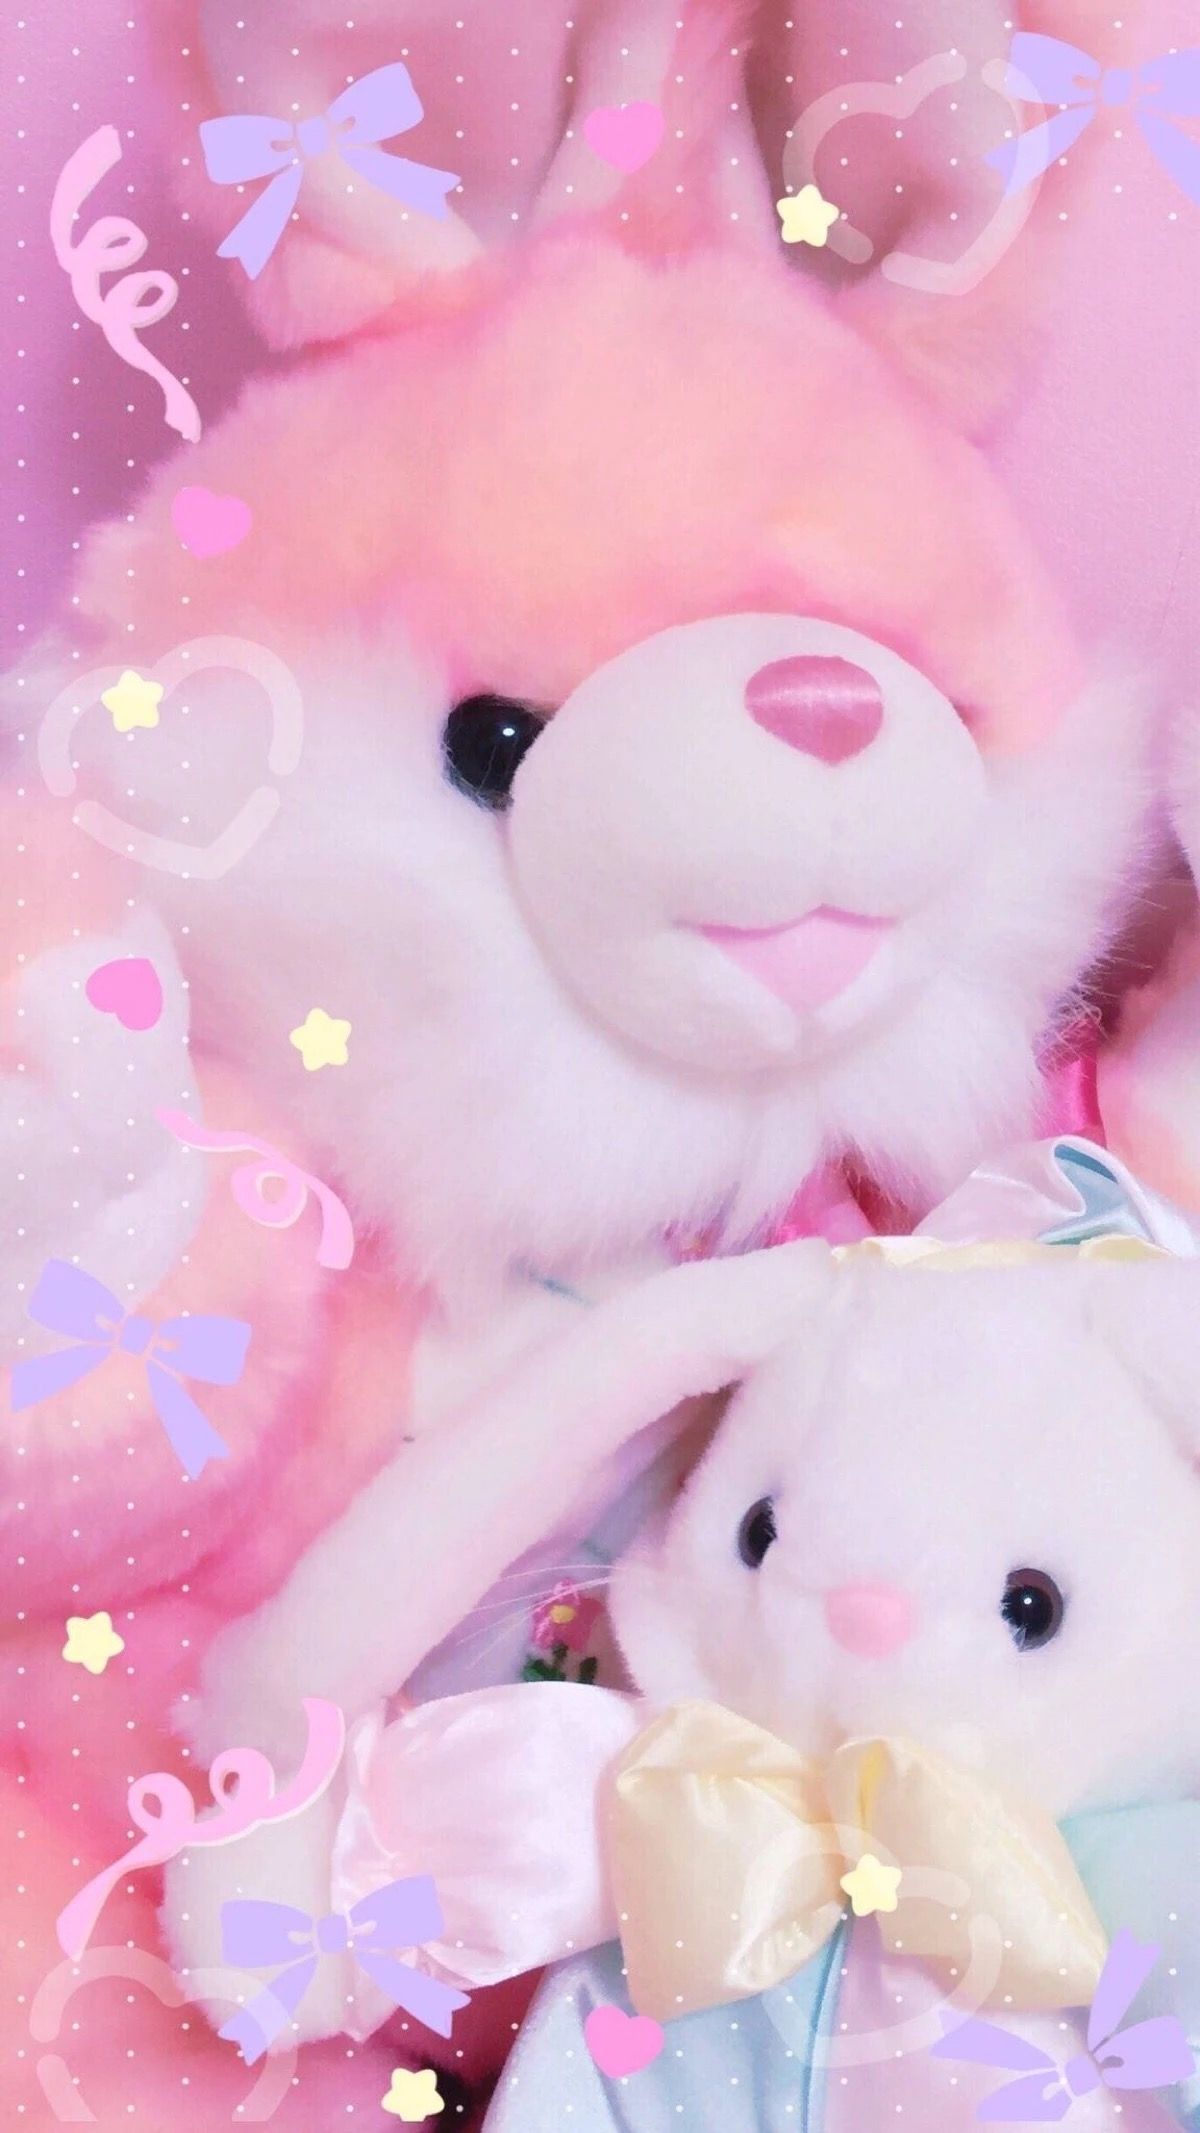 Two cute rabbit plushies on a pink background - Teddy bear